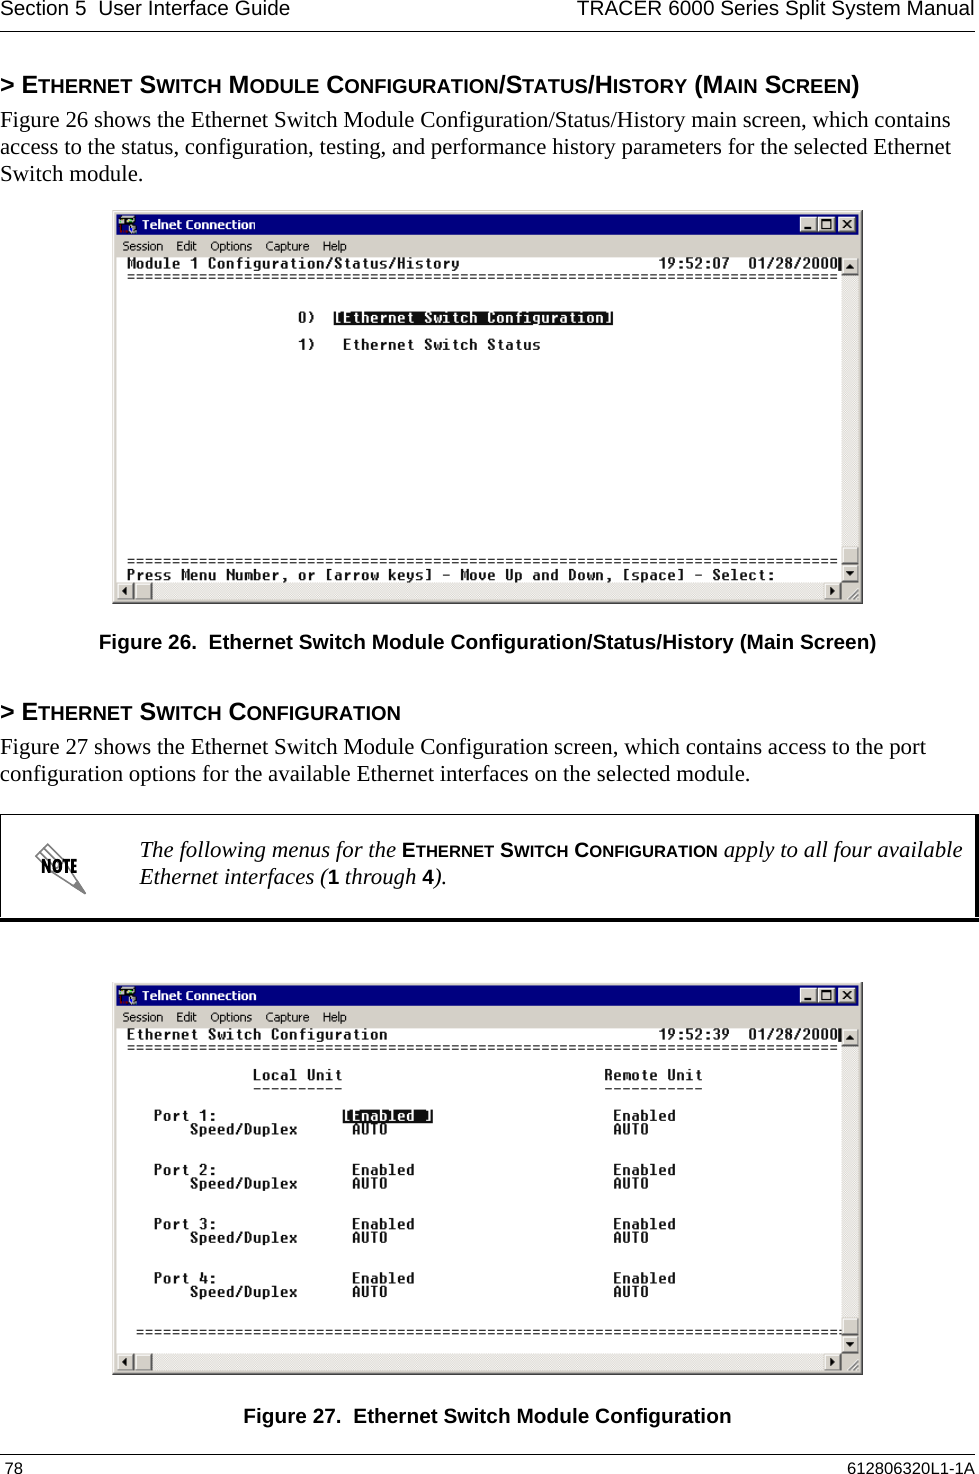 Section 5  User Interface Guide TRACER 6000 Series Split System Manual 78 612806320L1-1A&gt; ETHERNET SWITCH MODULE CONFIGURATION/STATUS/HISTORY (MAIN SCREEN)Figure 26 shows the Ethernet Switch Module Configuration/Status/History main screen, which contains access to the status, configuration, testing, and performance history parameters for the selected Ethernet Switch module.Figure 26.  Ethernet Switch Module Configuration/Status/History (Main Screen)&gt; ETHERNET SWITCH CONFIGURATIONFigure 27 shows the Ethernet Switch Module Configuration screen, which contains access to the port configuration options for the available Ethernet interfaces on the selected module.Figure 27.  Ethernet Switch Module ConfigurationThe following menus for the ETHERNET SWITCH CONFIGURATION apply to all four available Ethernet interfaces (1 through 4).